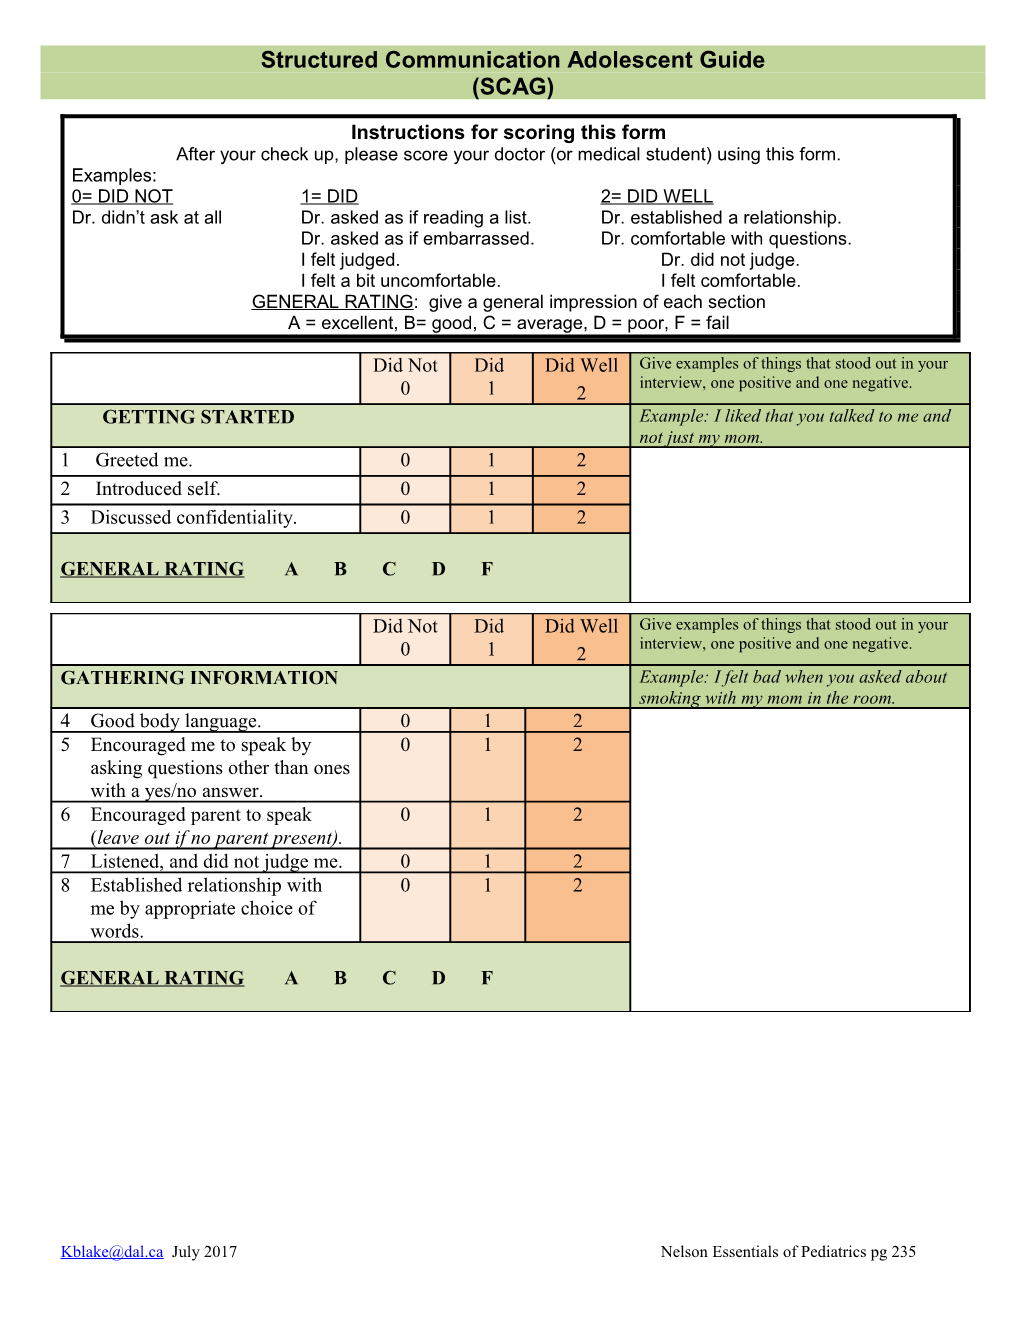 Instructions for Scoring the Scag / Feedback Form